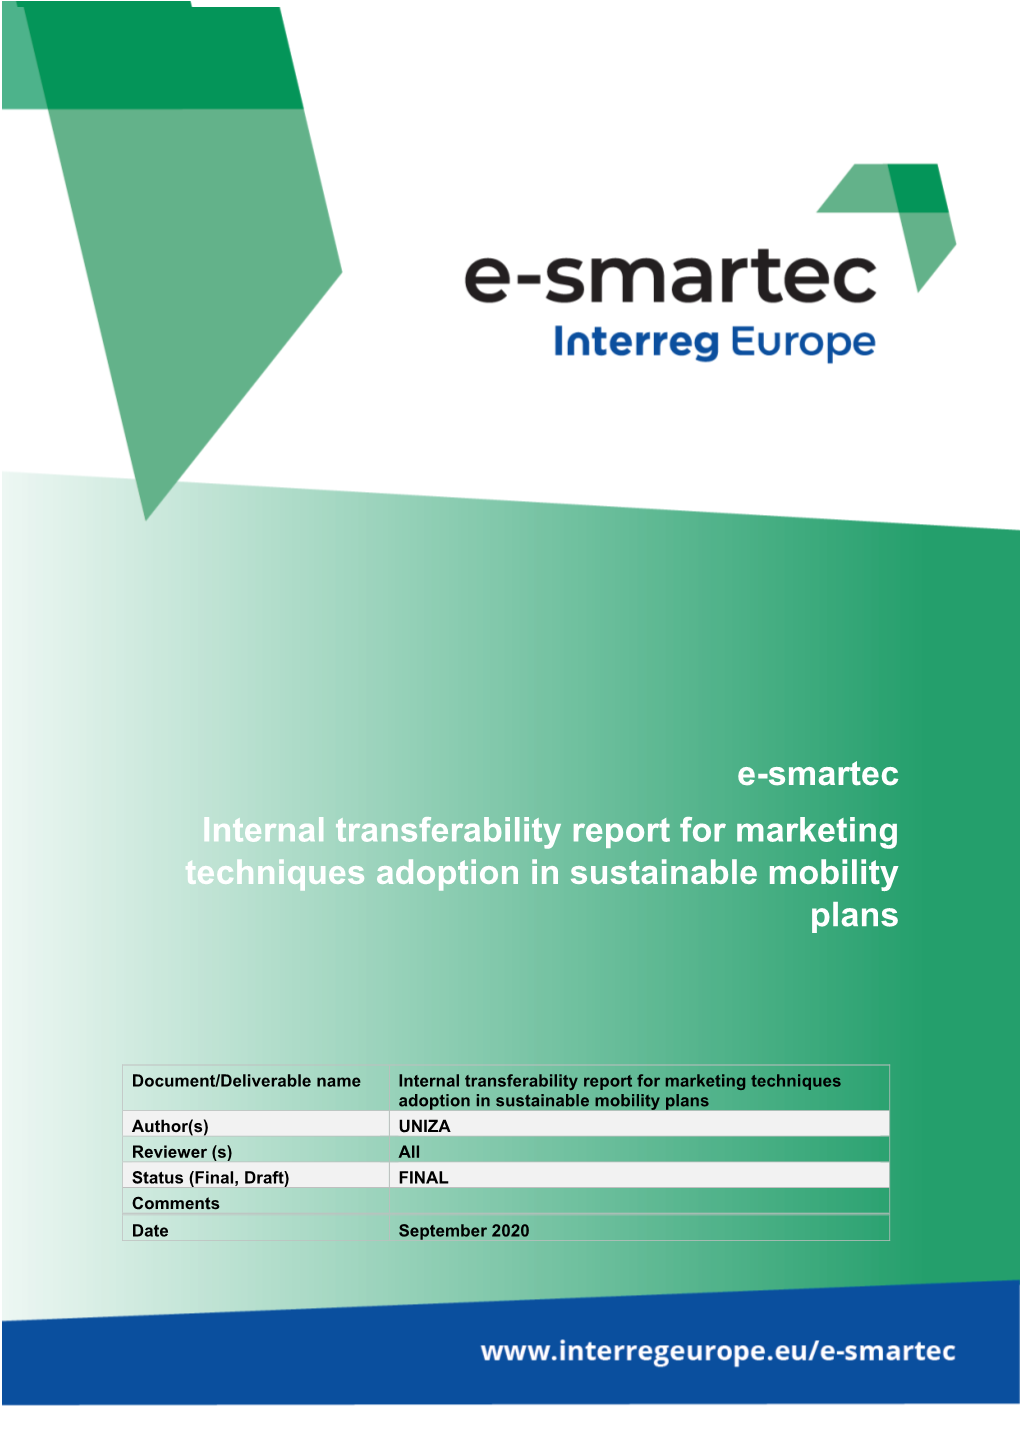 E-Smartec Internal Transferability Report for Marketing Techniques Adoption in Sustainable Mobility Plans